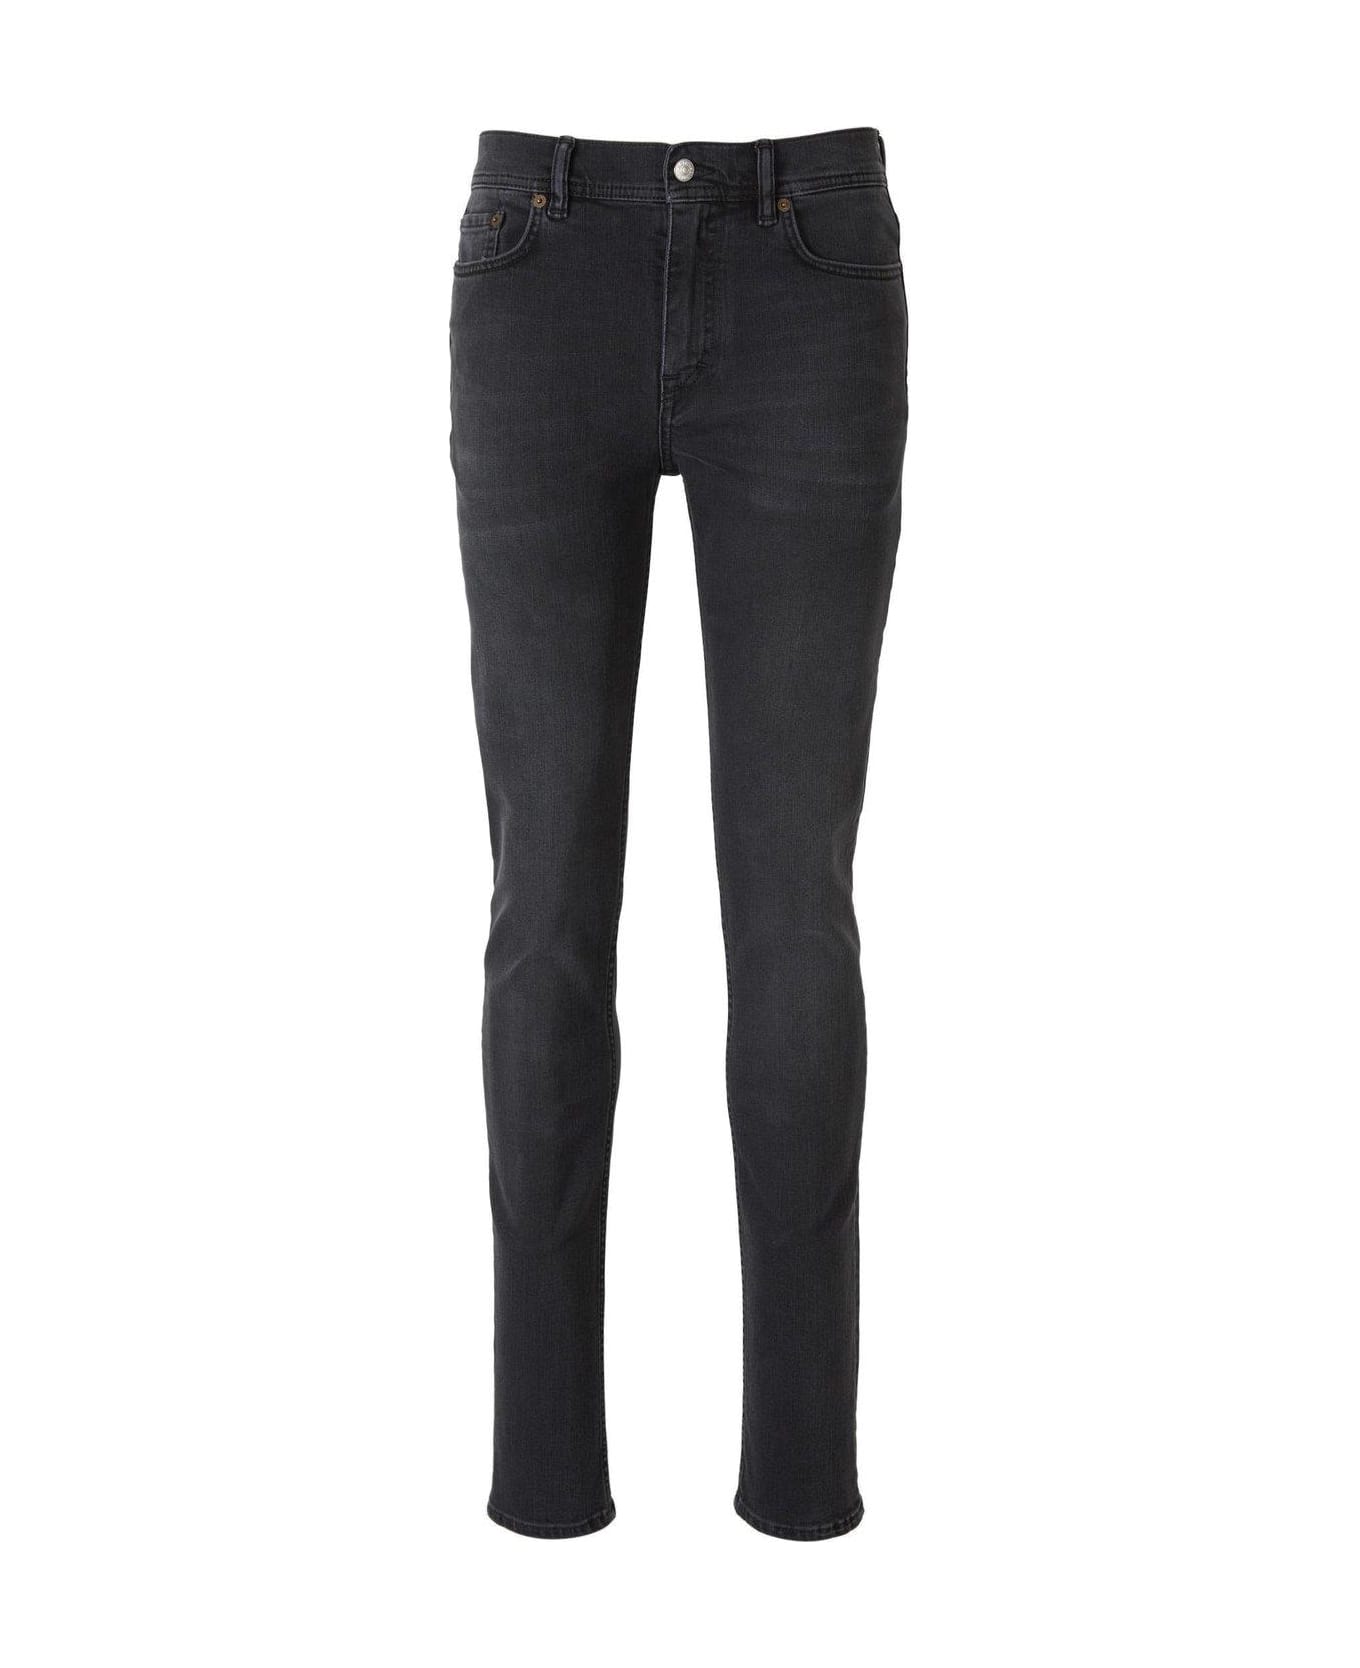 Acne Studios North Mid-rise Skinny-fit Jeans - Used Black